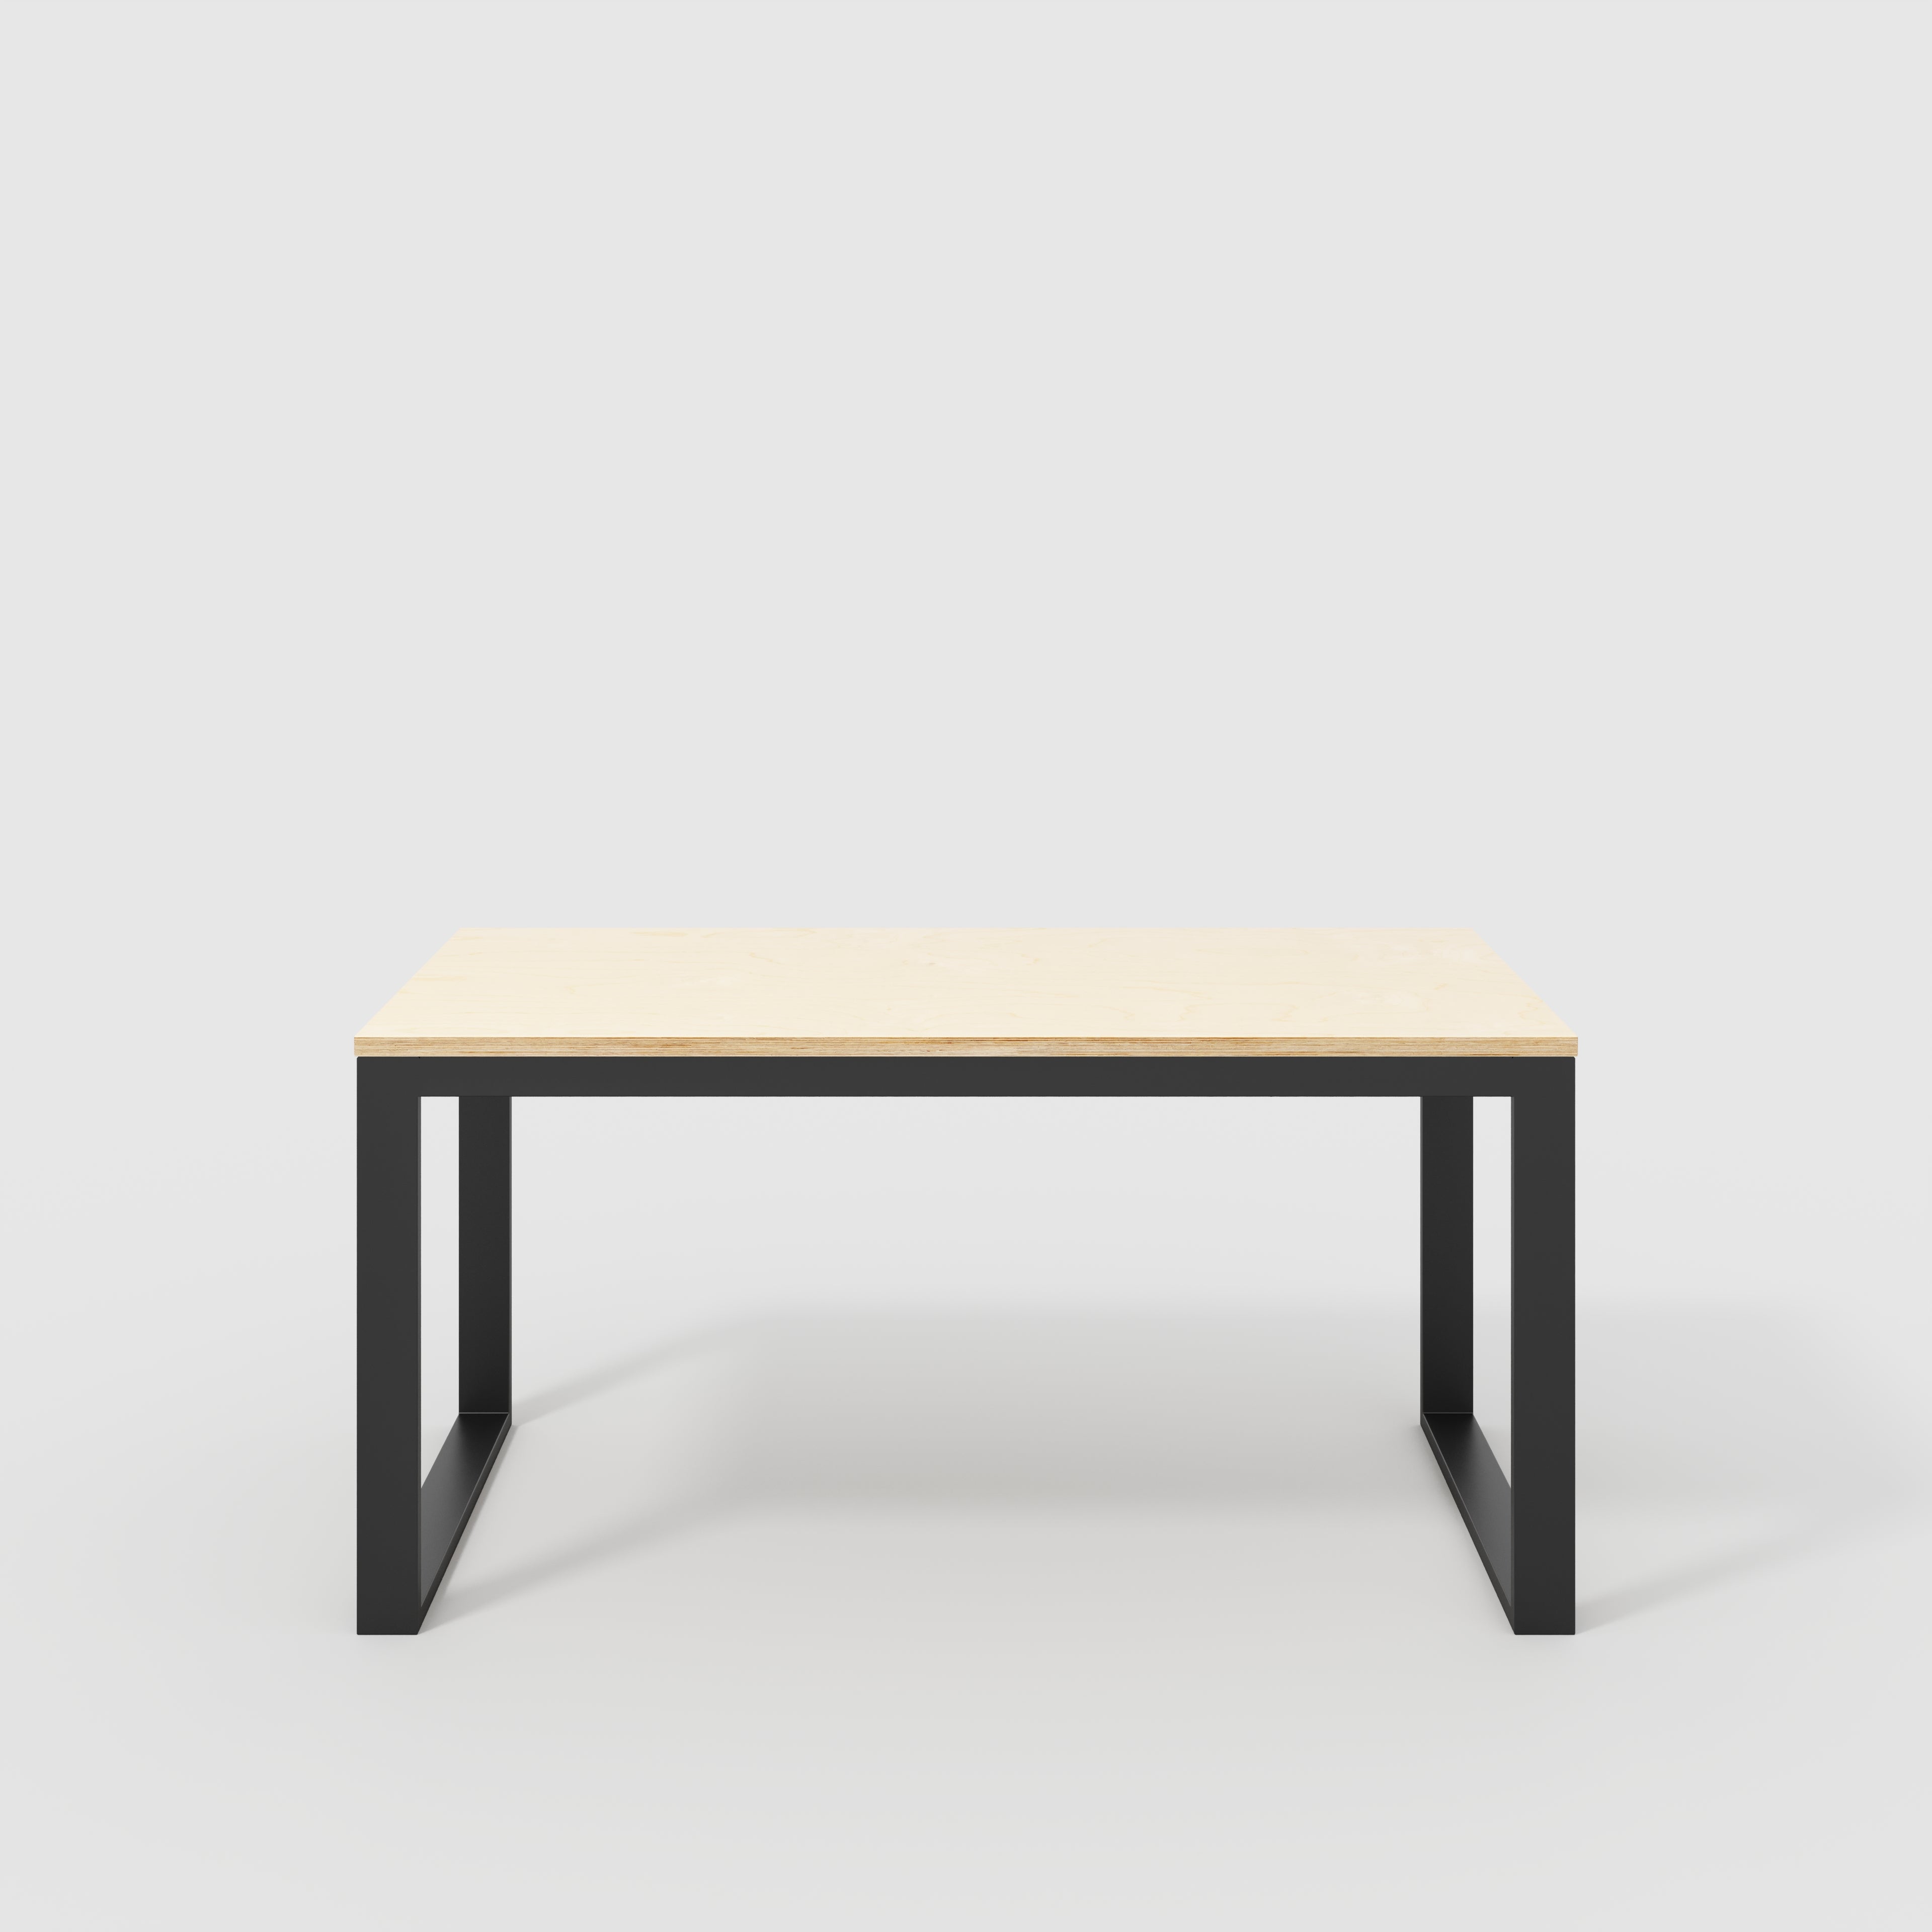 Table with Black Industrial Frame - Plywood Birch - 1500(w) x 745(d) x 735(h)